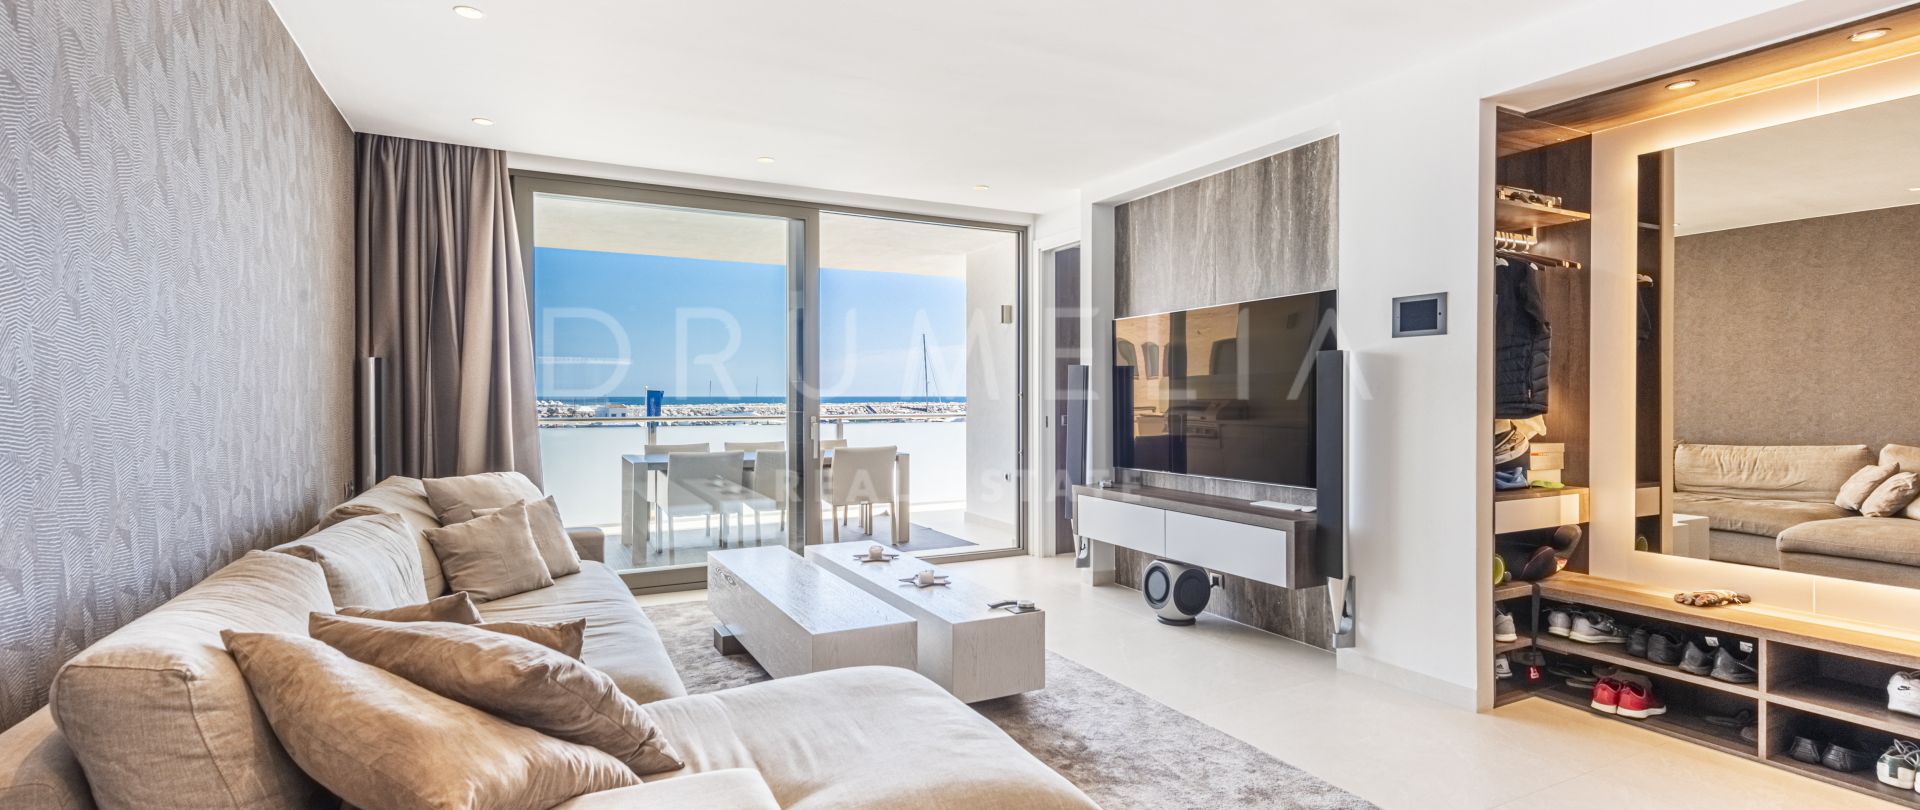 Unique, Chic Modern Hollywood-Style Apartment in glorious Puerto Banus, Marbella